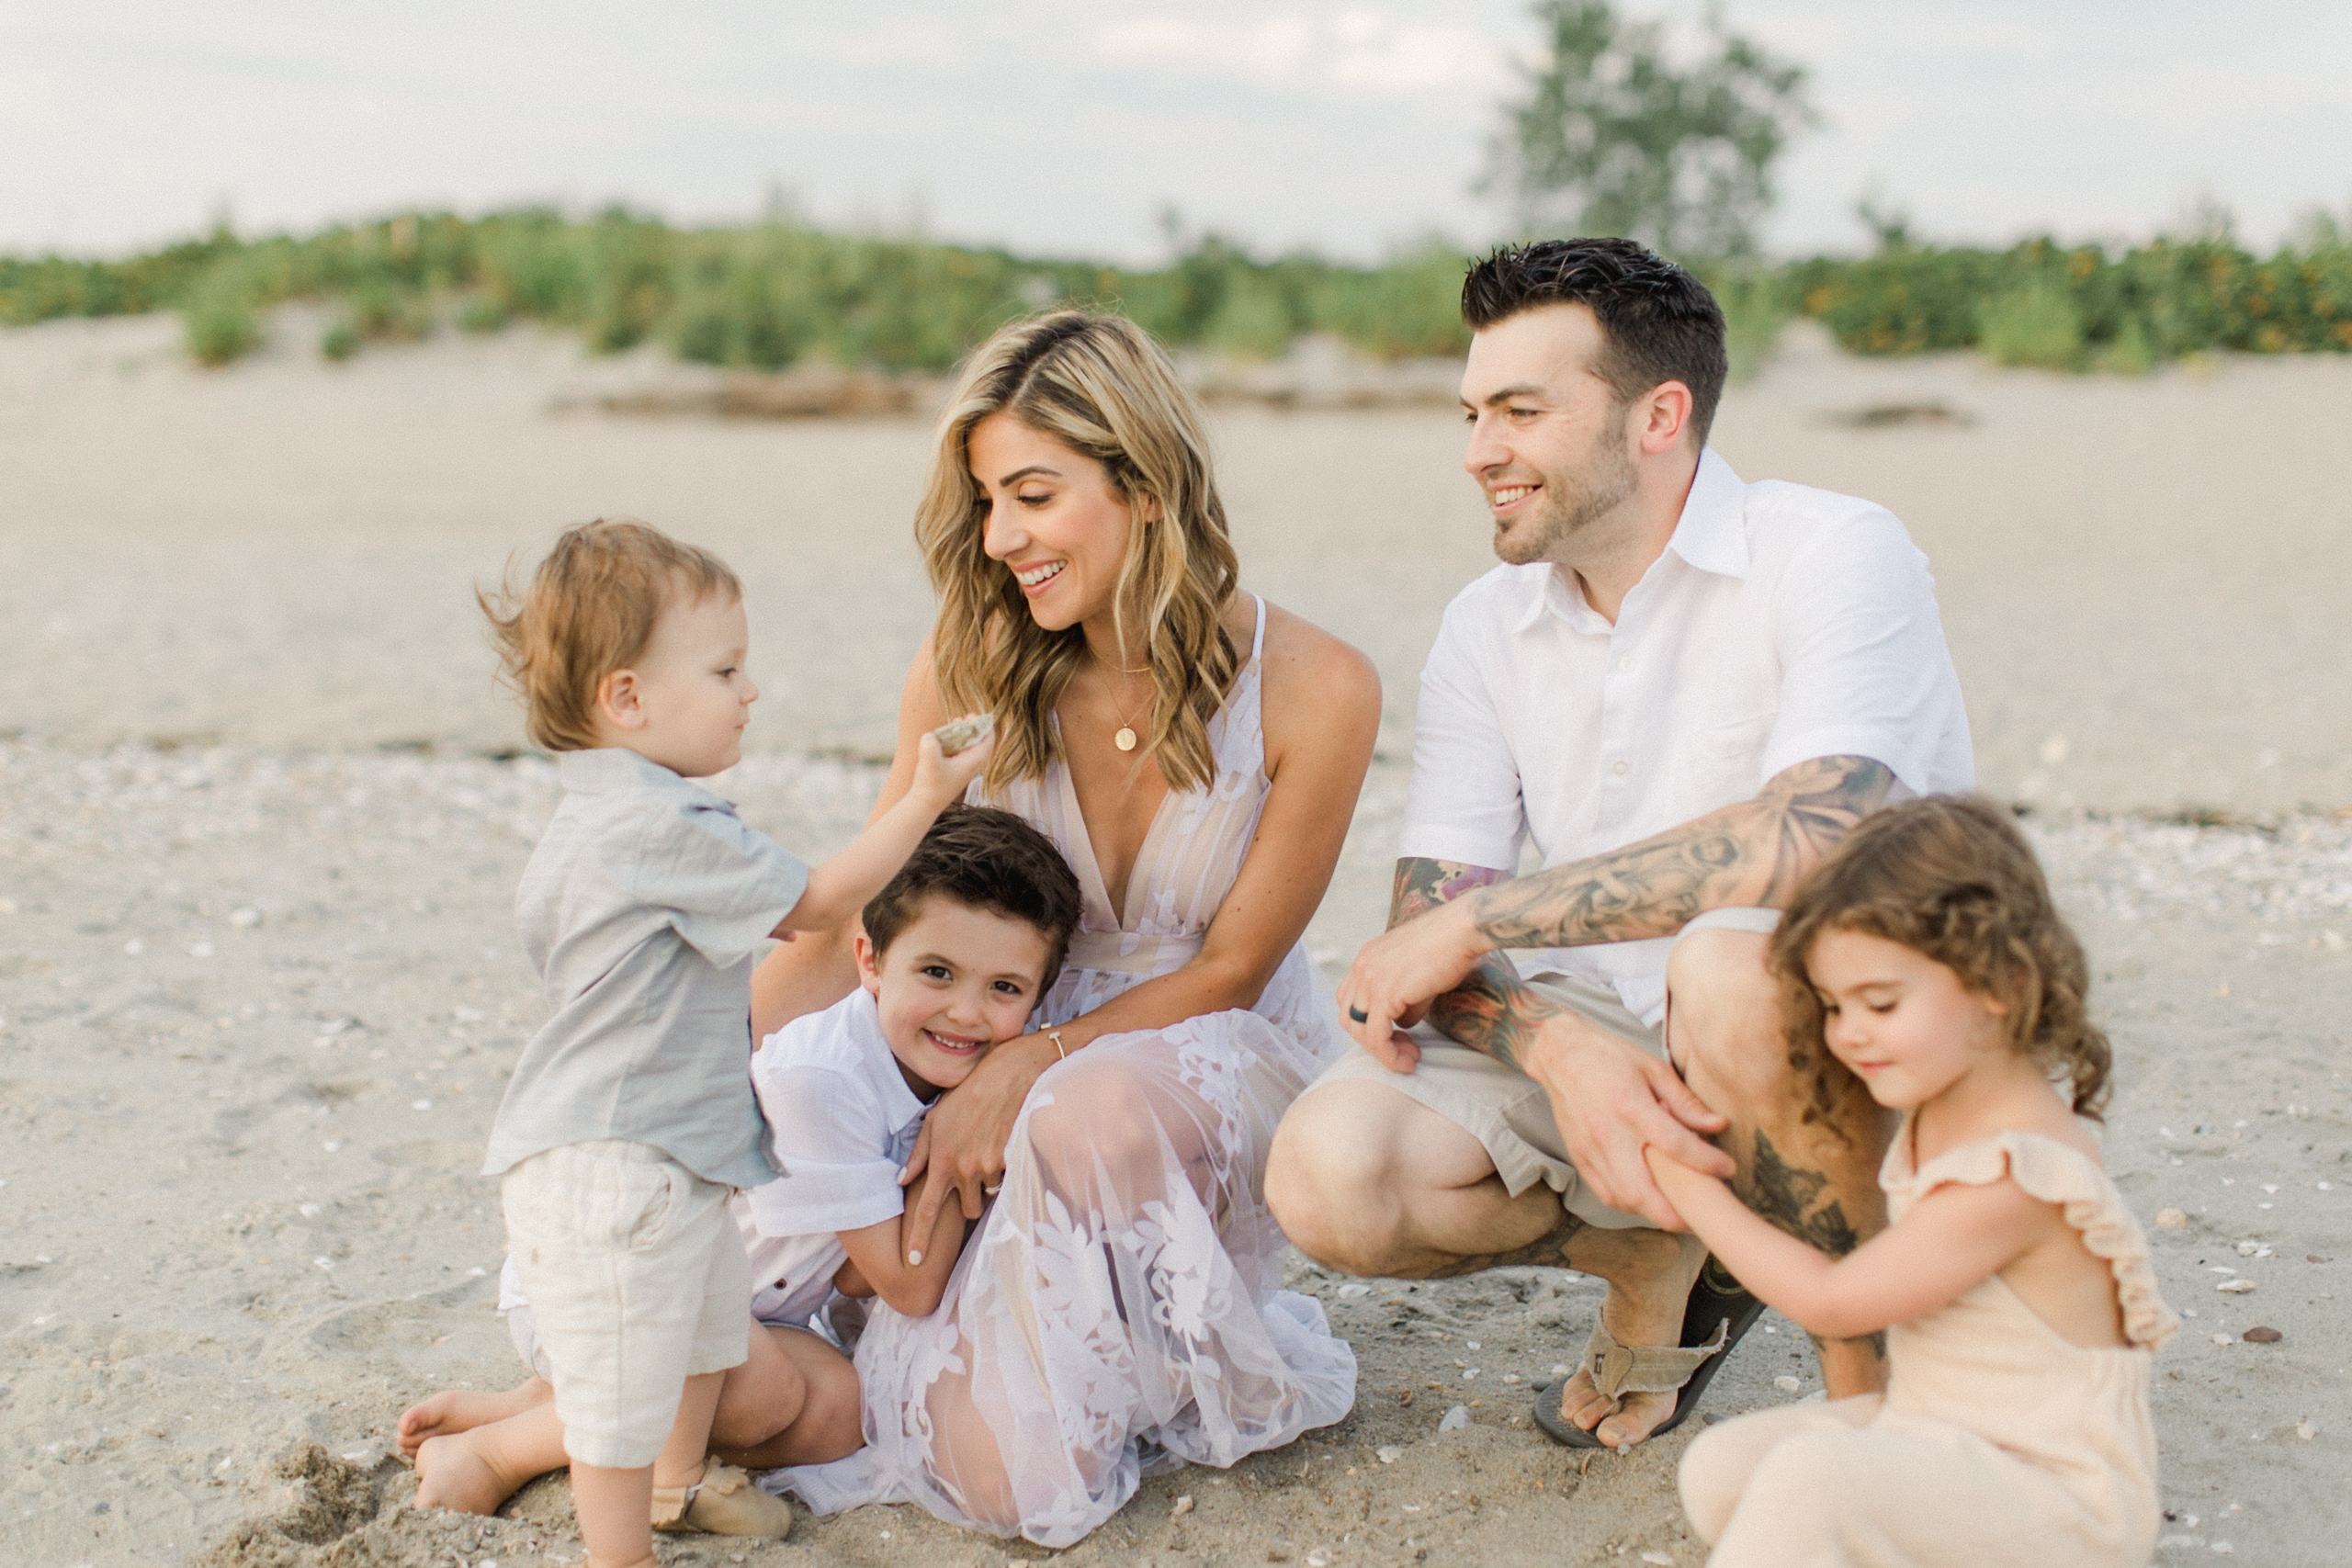 Connecticut life and style blogger Lauren McBride shares Tips for Taking Family Holiday Photos, including holiday card options from Minted.